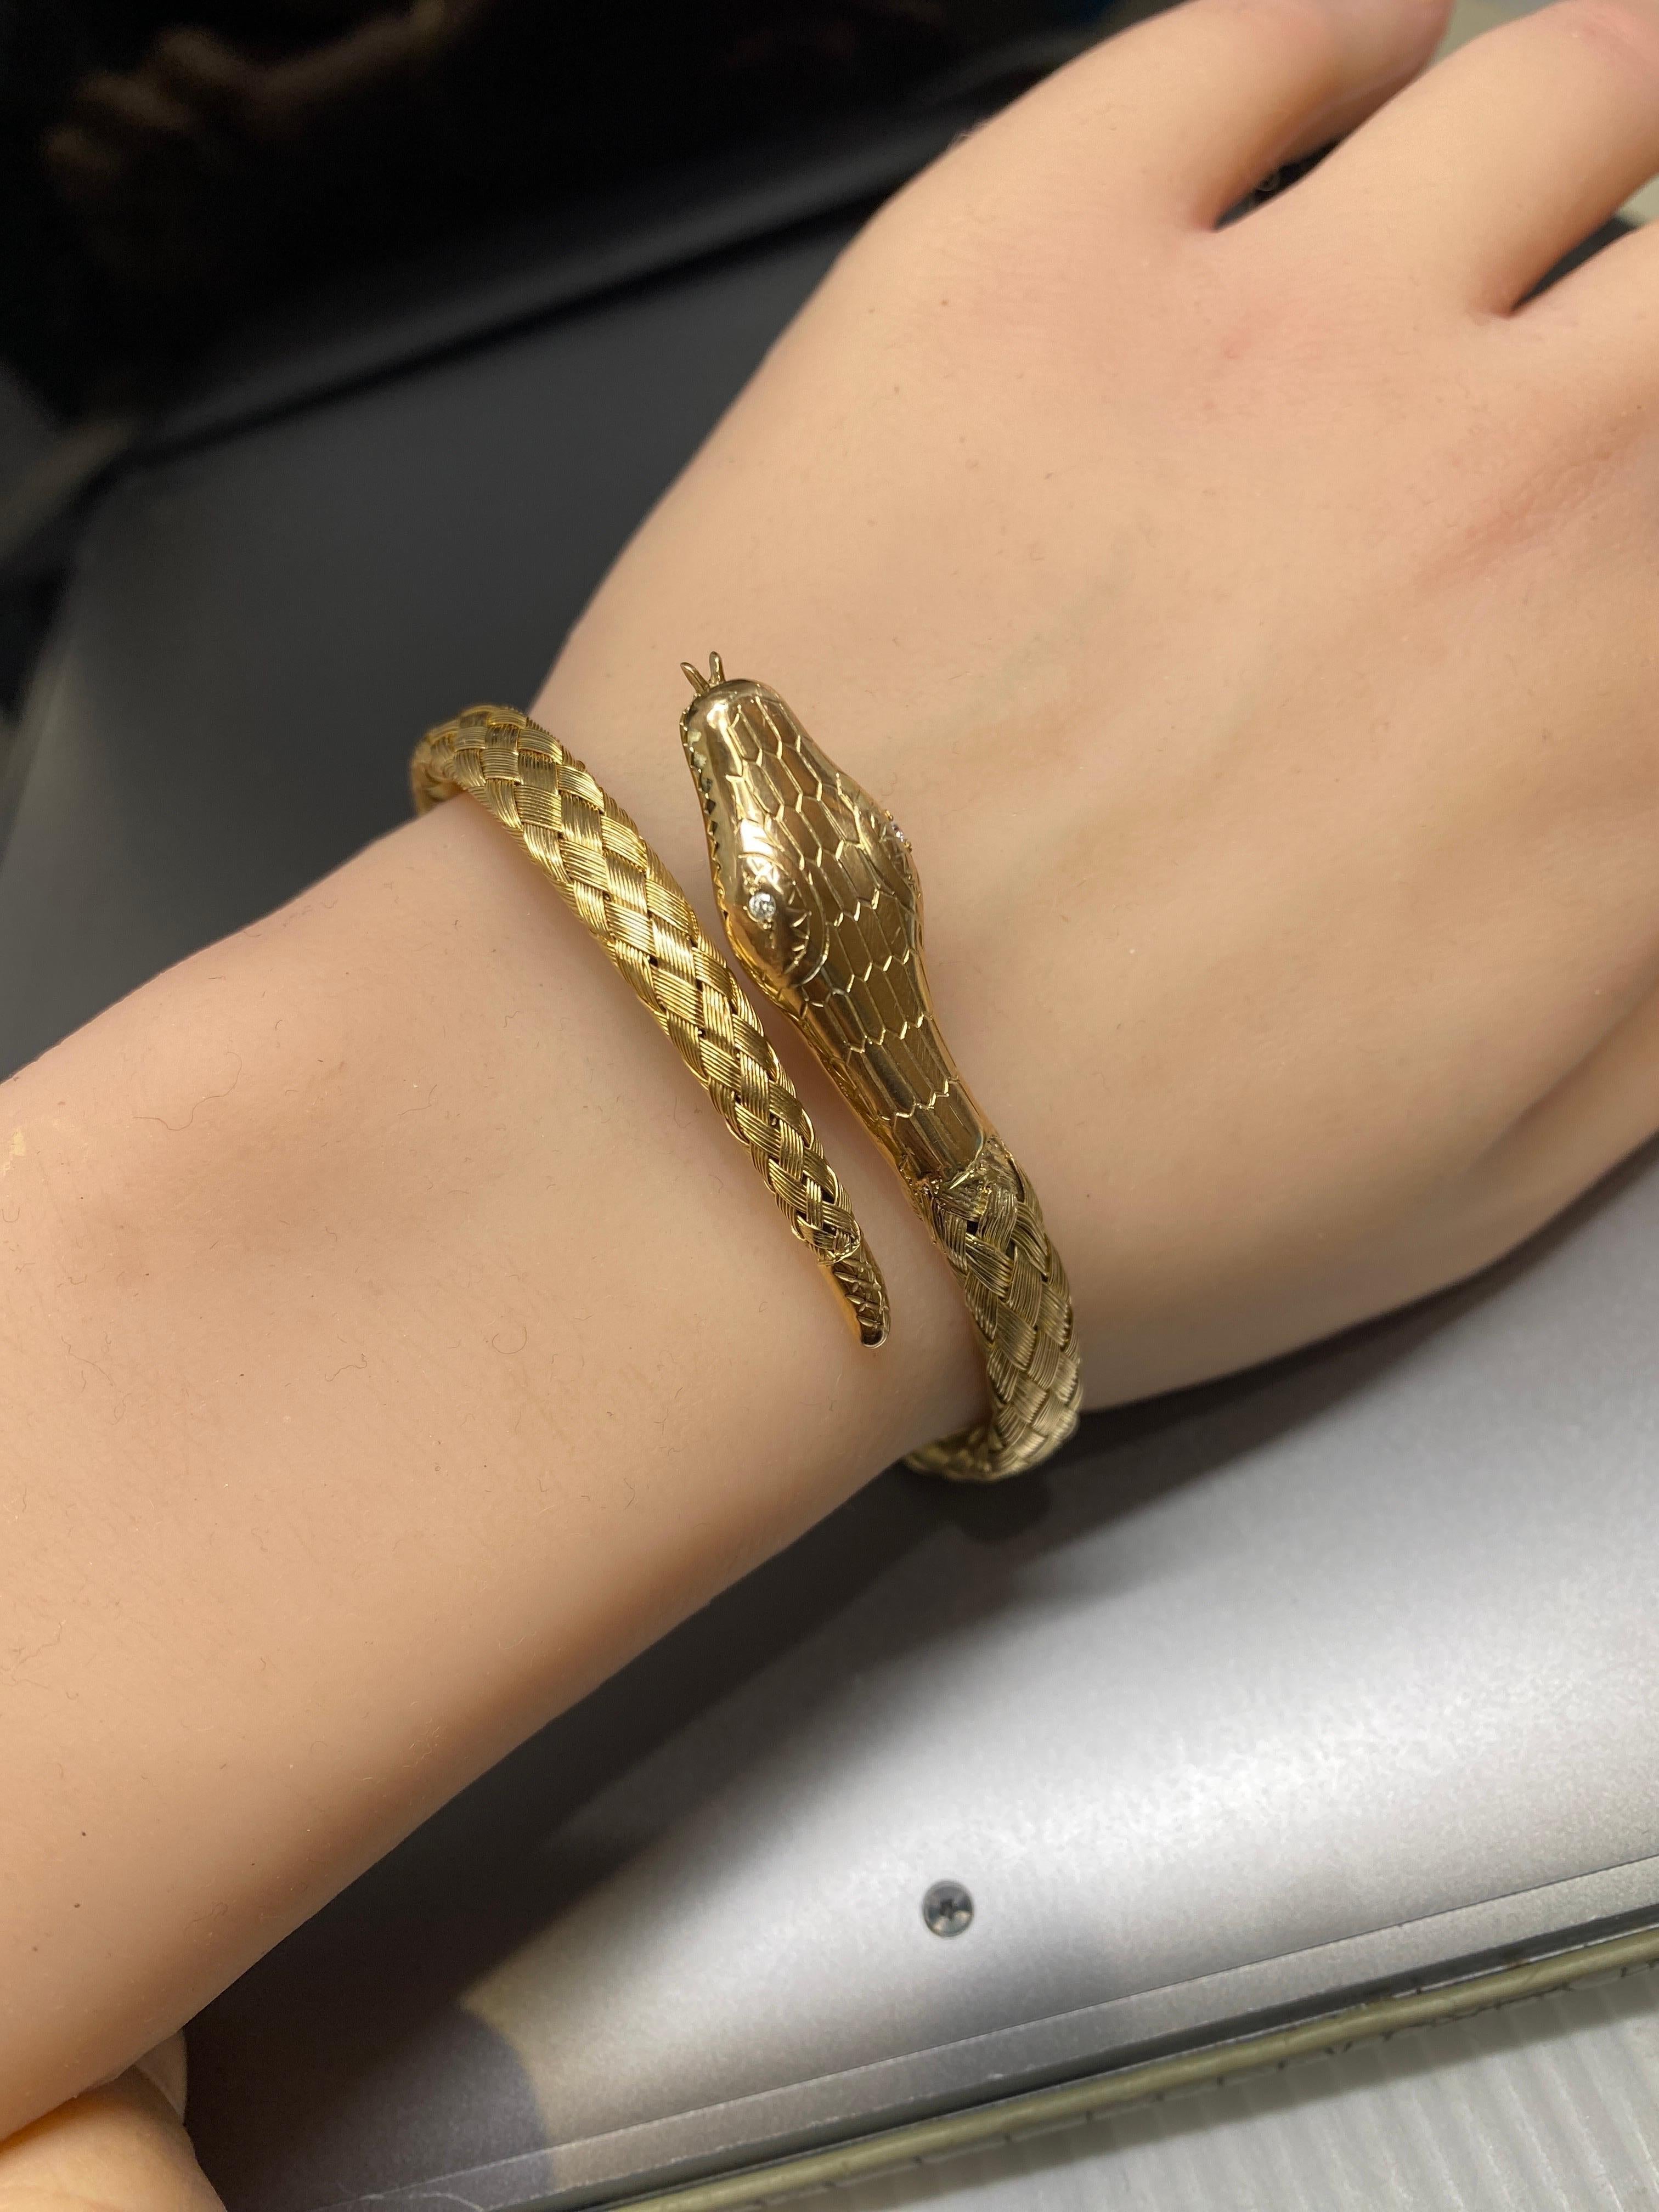 This antique Victorian Woven Snake Wrap Coil Bracelet is crafted in lustrous  14k Yellow Gold.   It features two sparkling diamonds as eyes and detailed with a forked tongue peaking out of it's mouth.  The head is adorned with scale engravings on